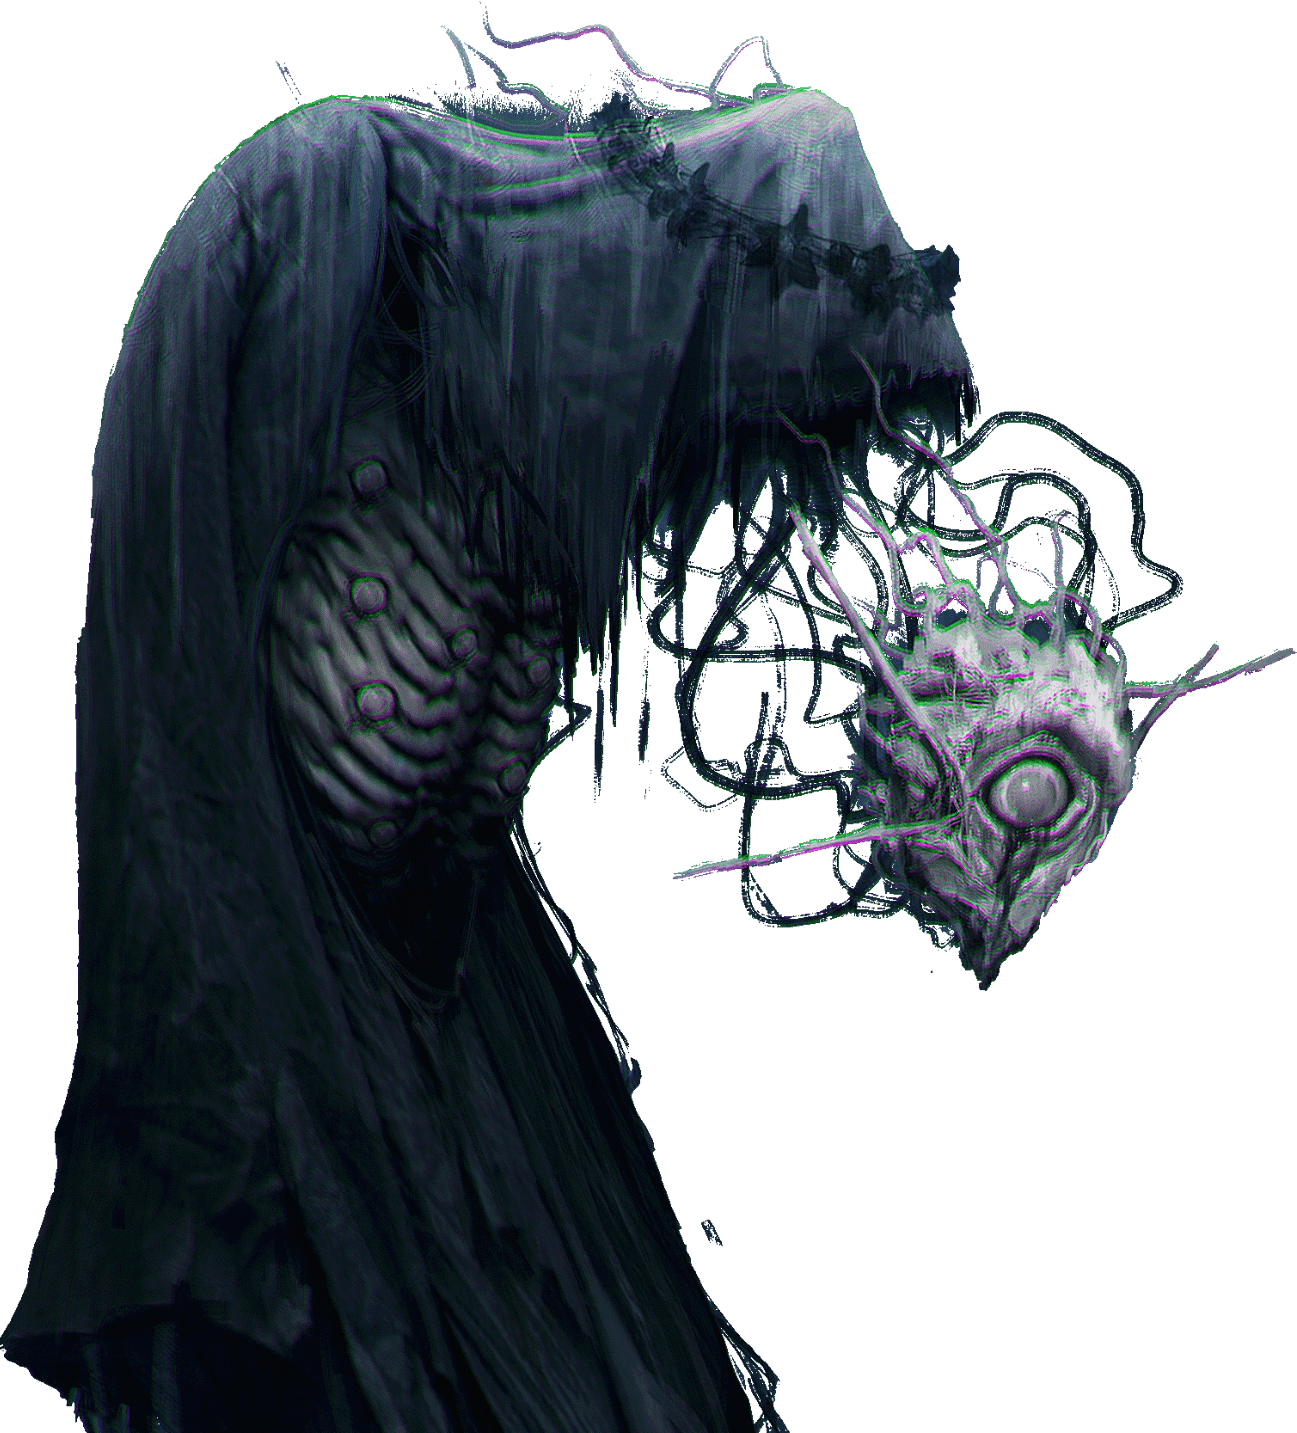 A large cape hides the disfigured body whilst a corrupted face floats apart from the main body watching your every move in the world of The Lords of the Fallen